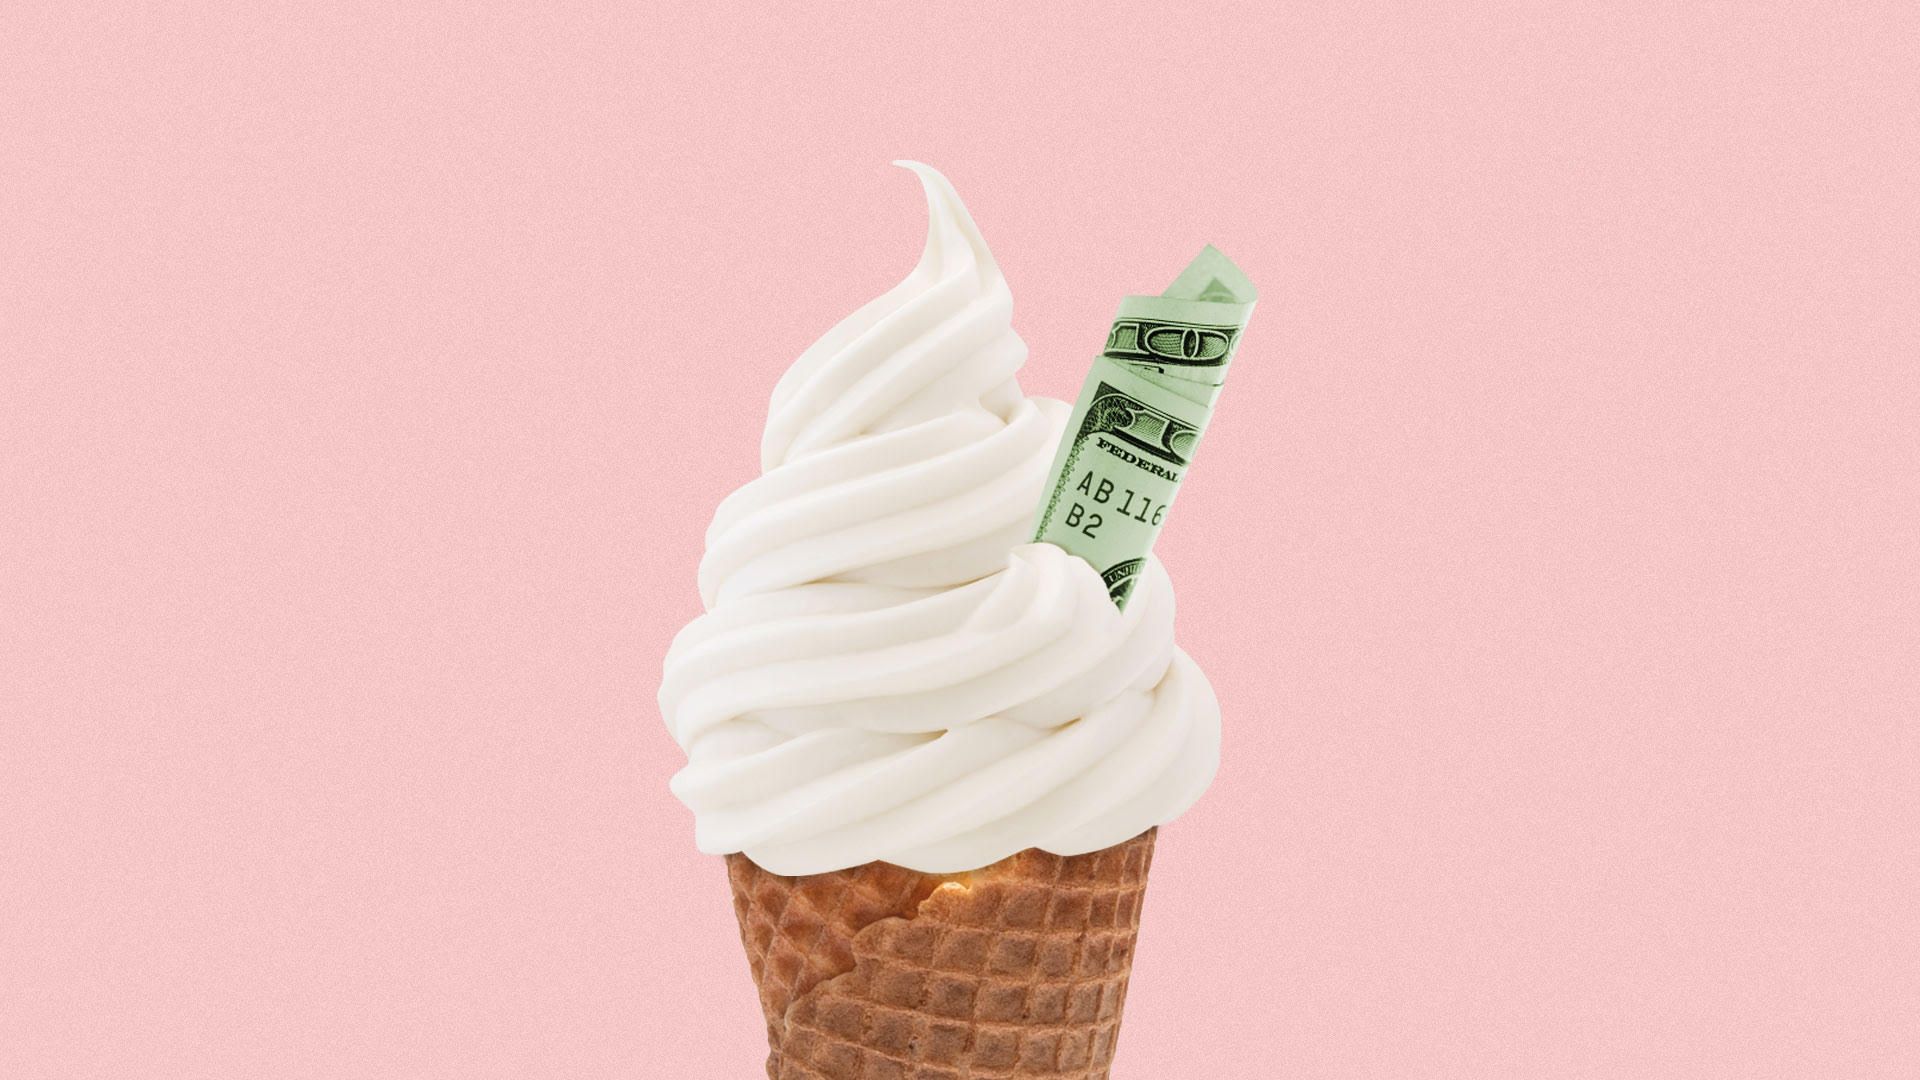 Illustration of ice cream cone with a $100 bill sticking out of the side.